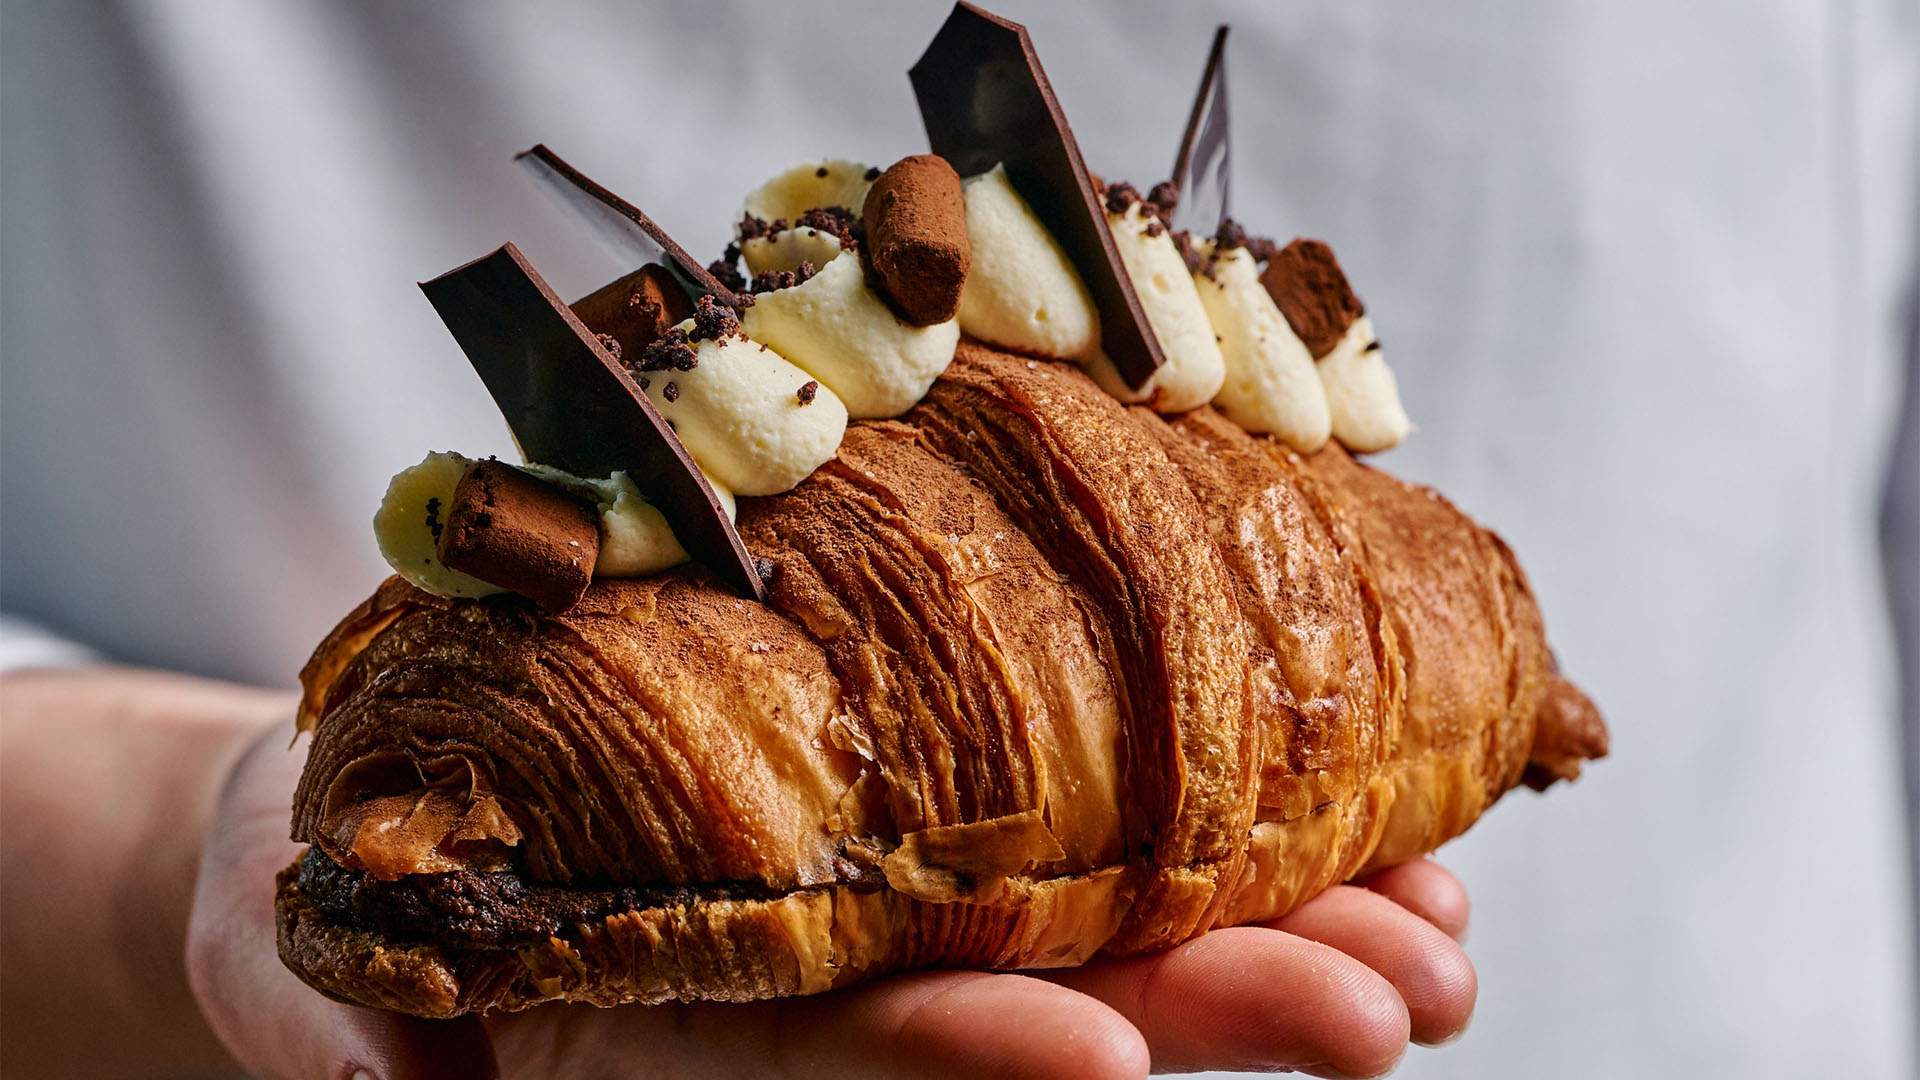 Lune Croissanterie and Koko Black Are Joining Forces on a Decadent Chocolate Truffle Croissant